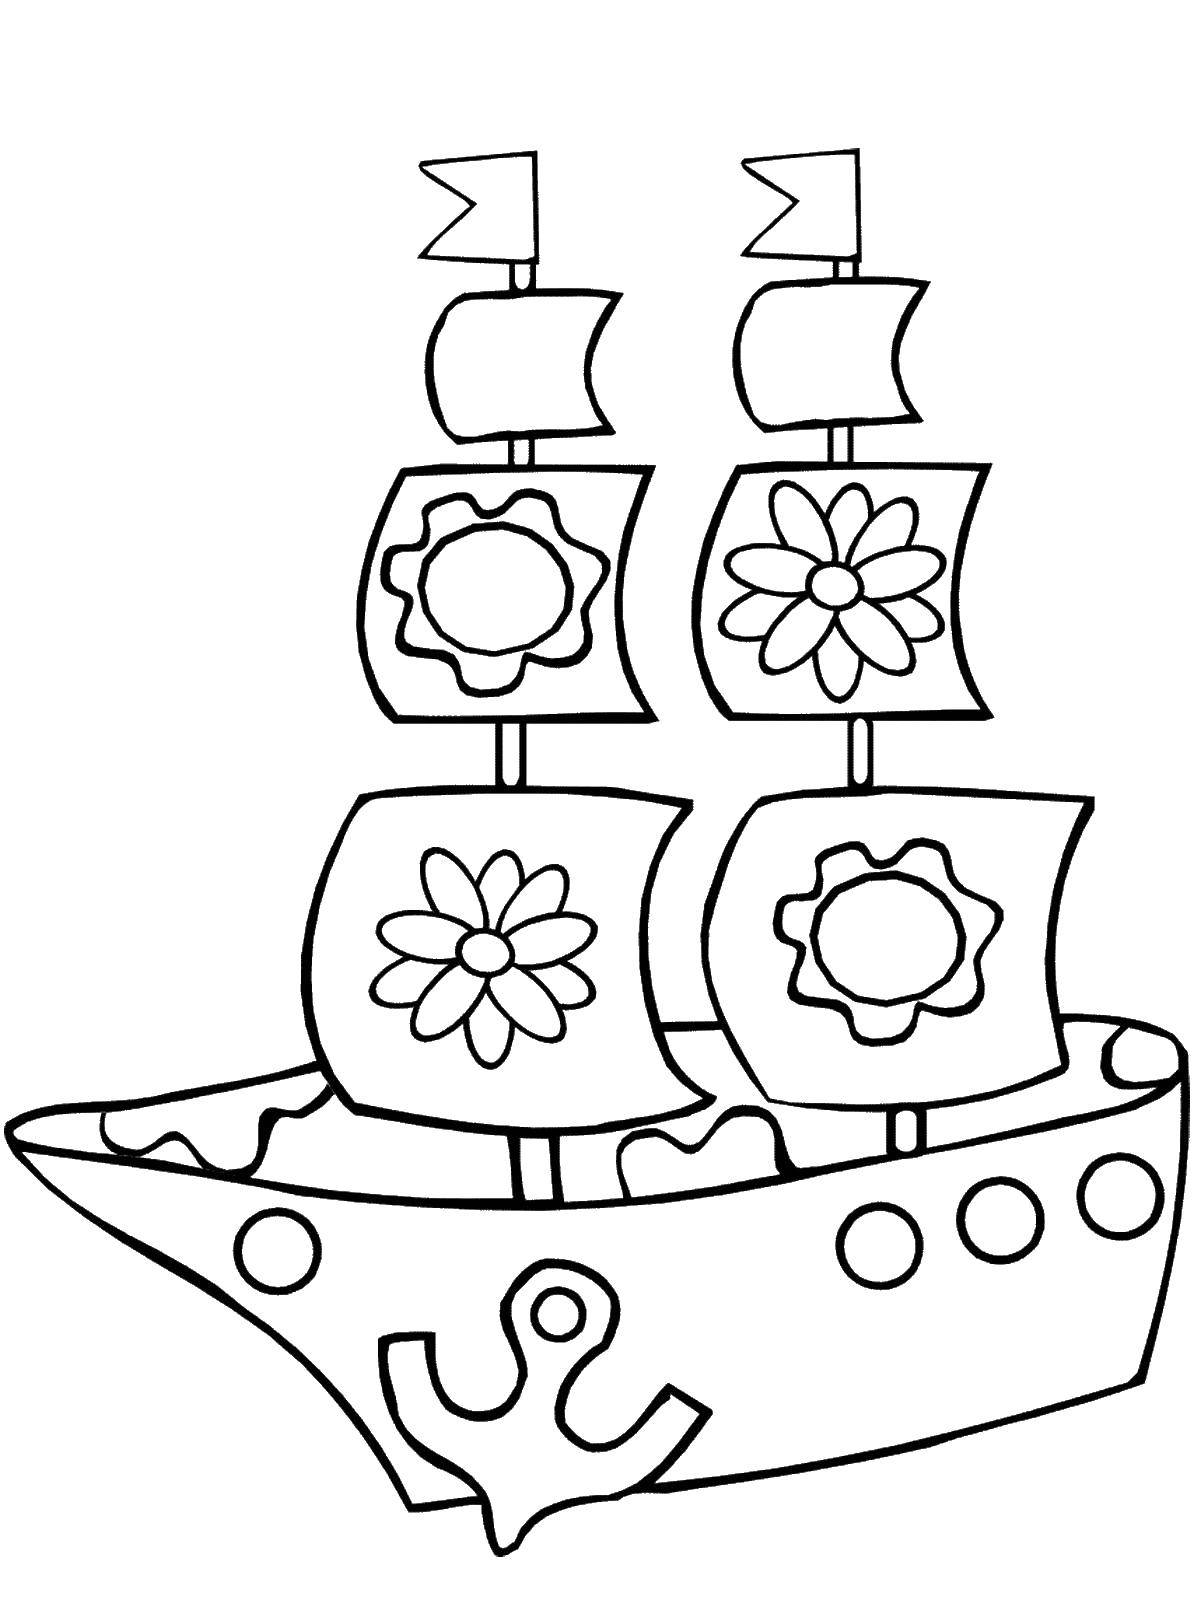 Coloring A ship with sails. Category toys. Tags:  ship, sails, anchor, flowers.